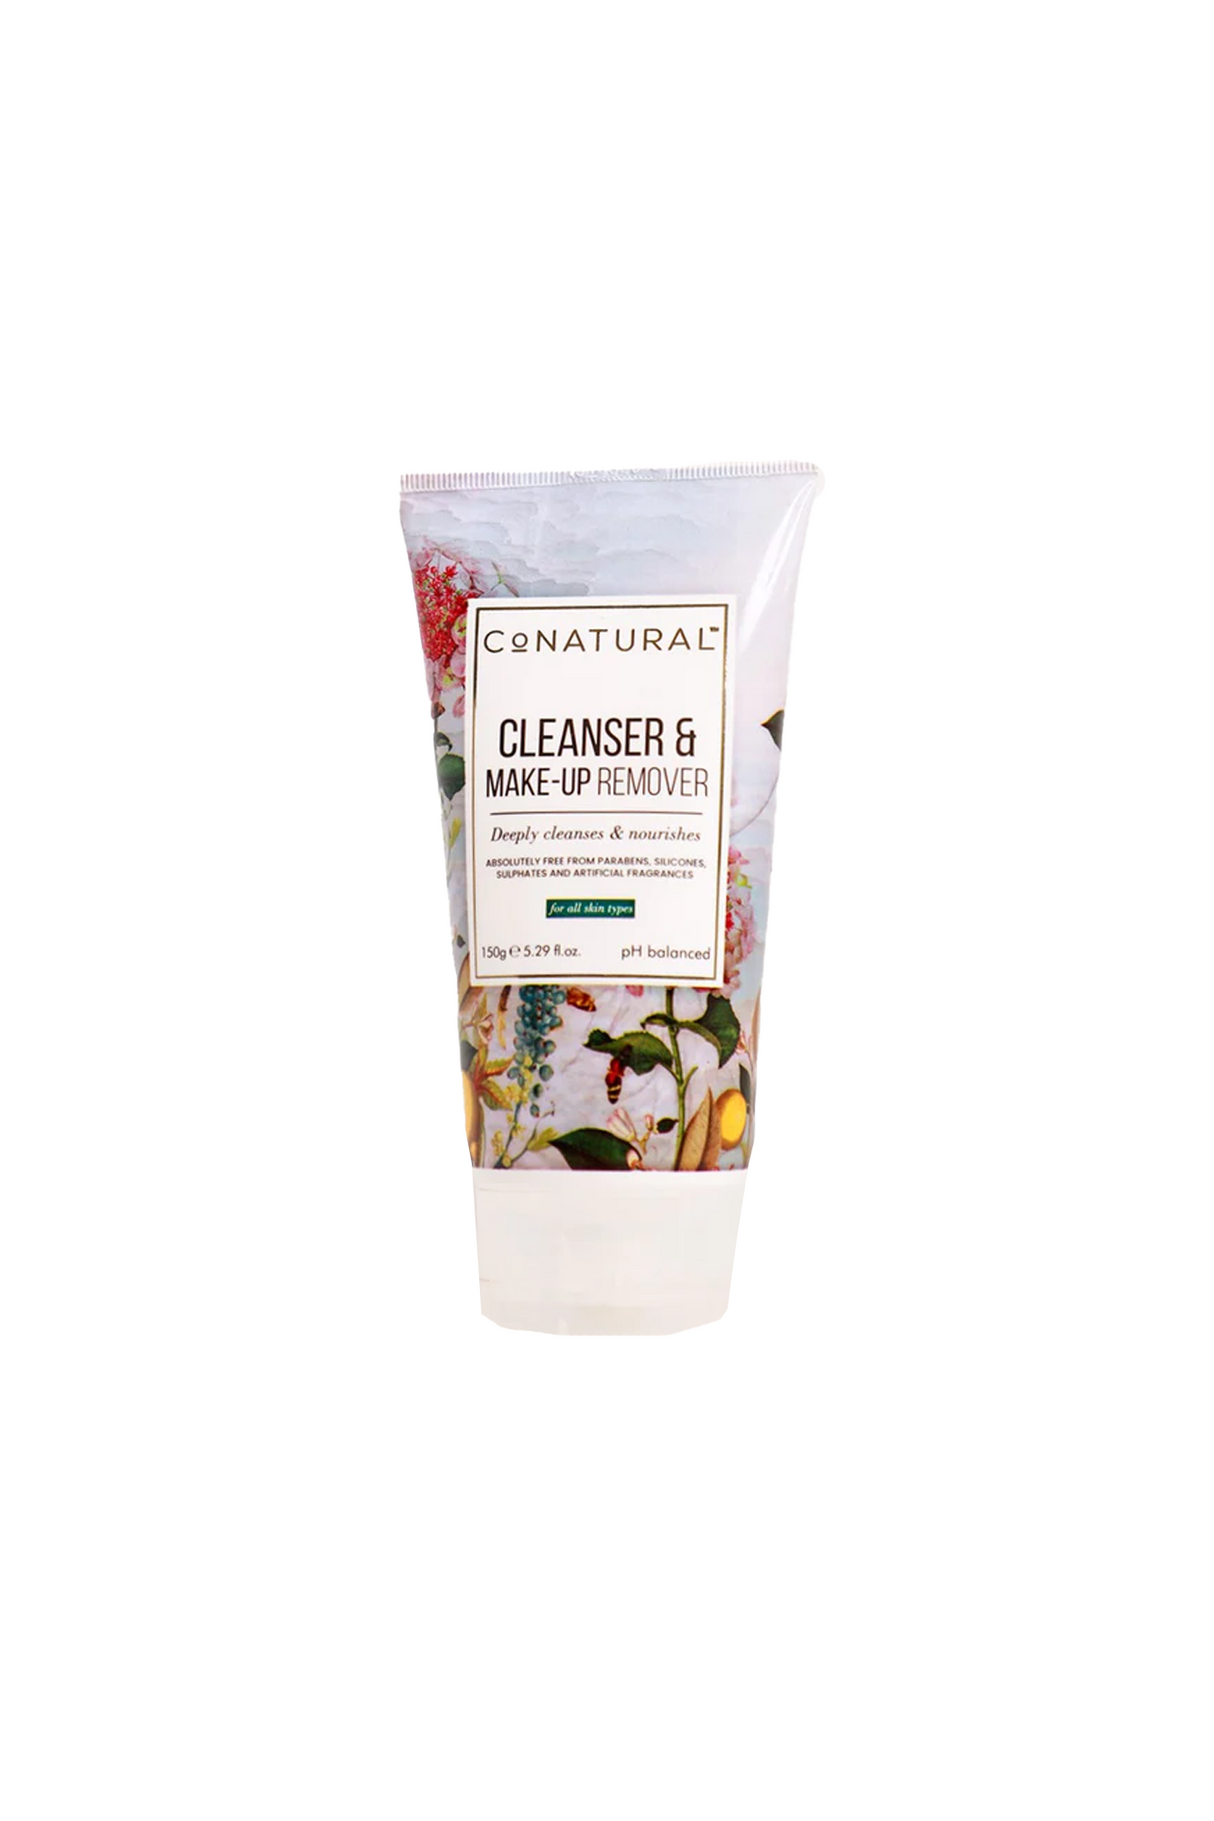 conatural cleanser&makeup remover 150g